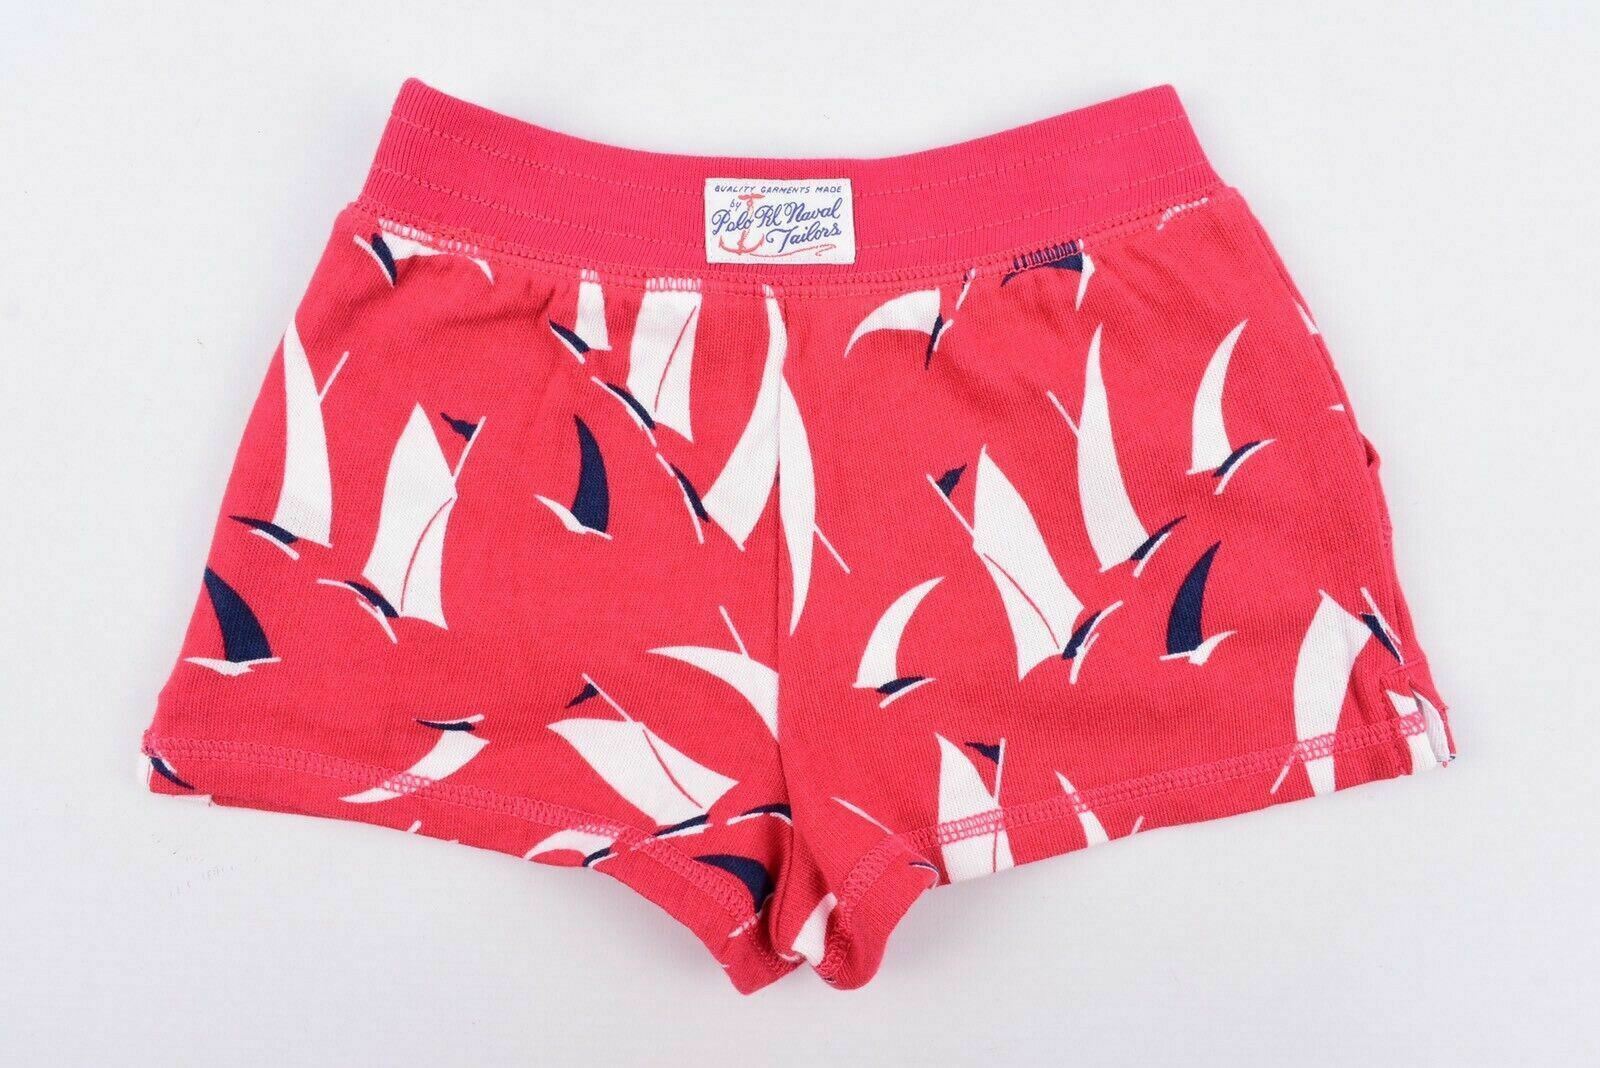 POLO RALPH LAUREN Baby Girls Shorts Red/With Print sizes 9 m /12 m /18 months